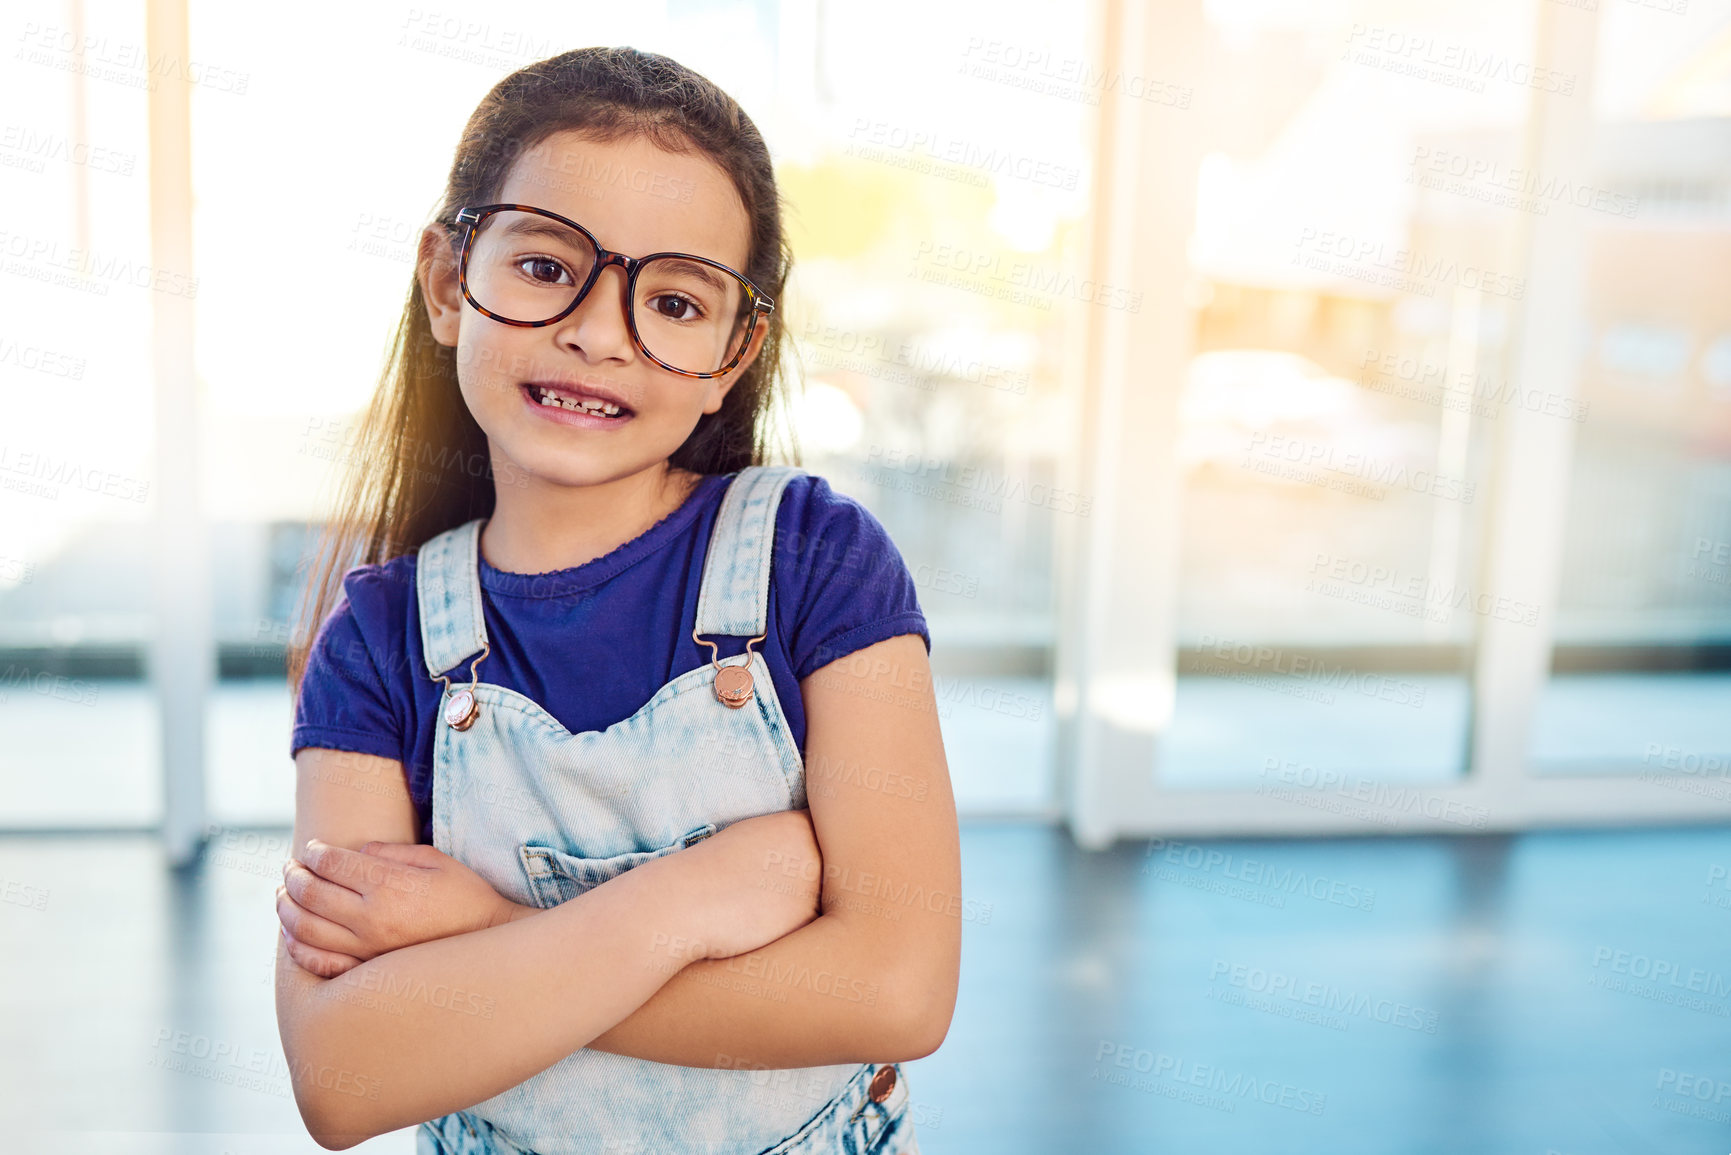 Buy stock photo Portrait of an adorable little girl with glasses on posing with her arms folded at home